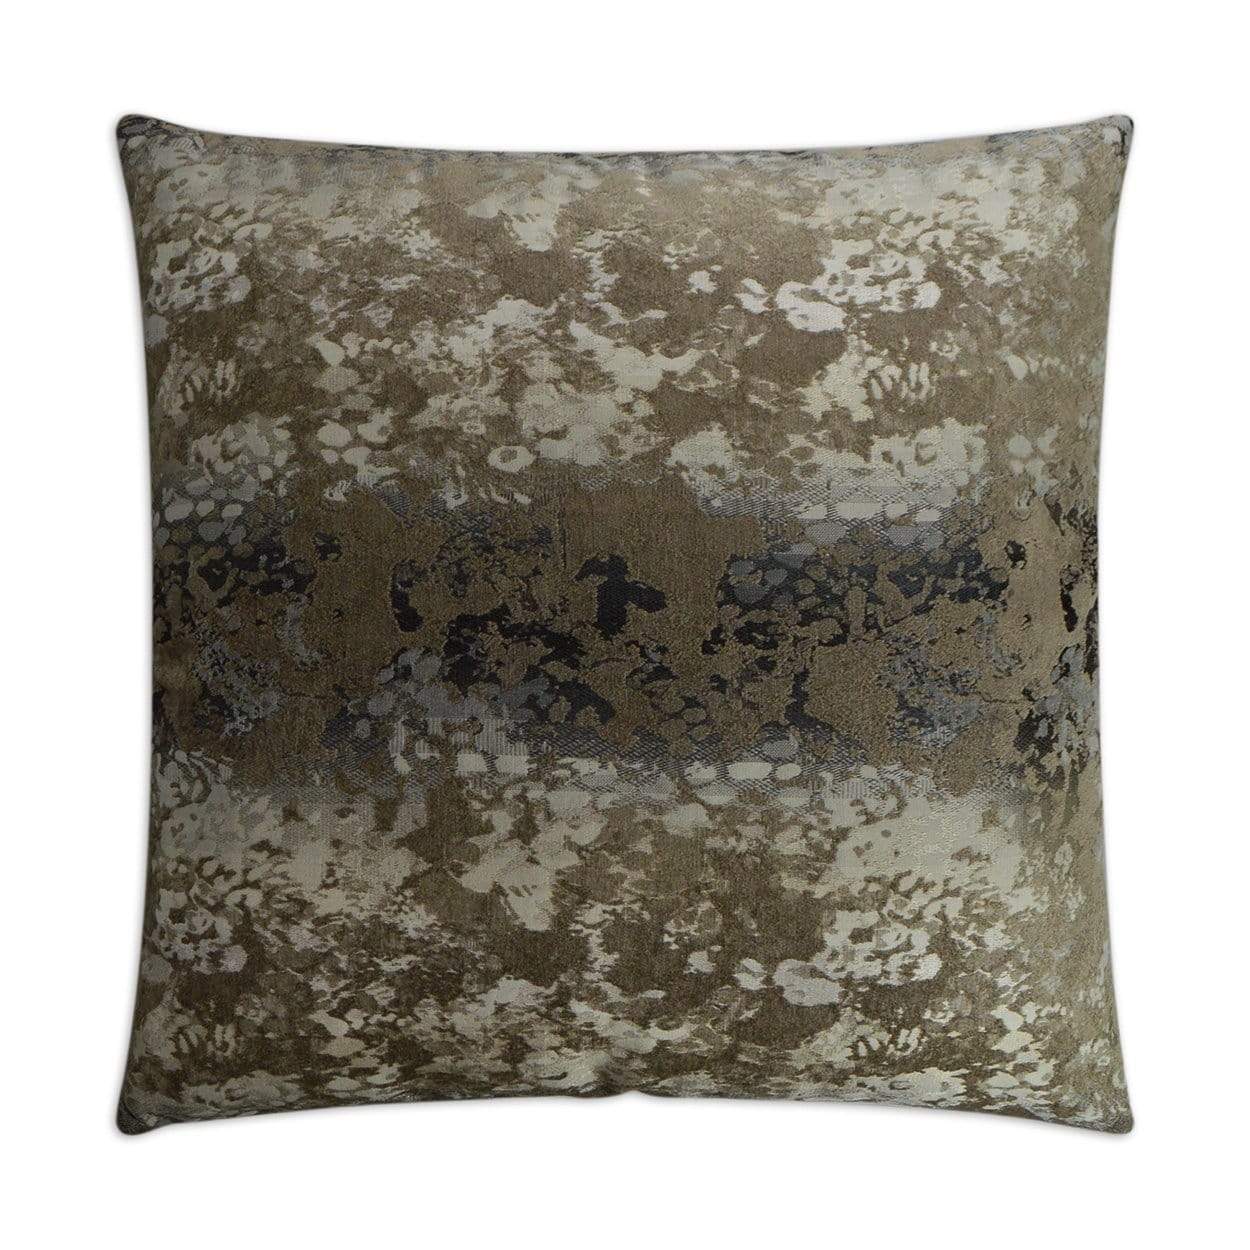 D.V. Kap D.V. Kap Isotope Pillow - Available in 2 Colors Cocoa 2962-C